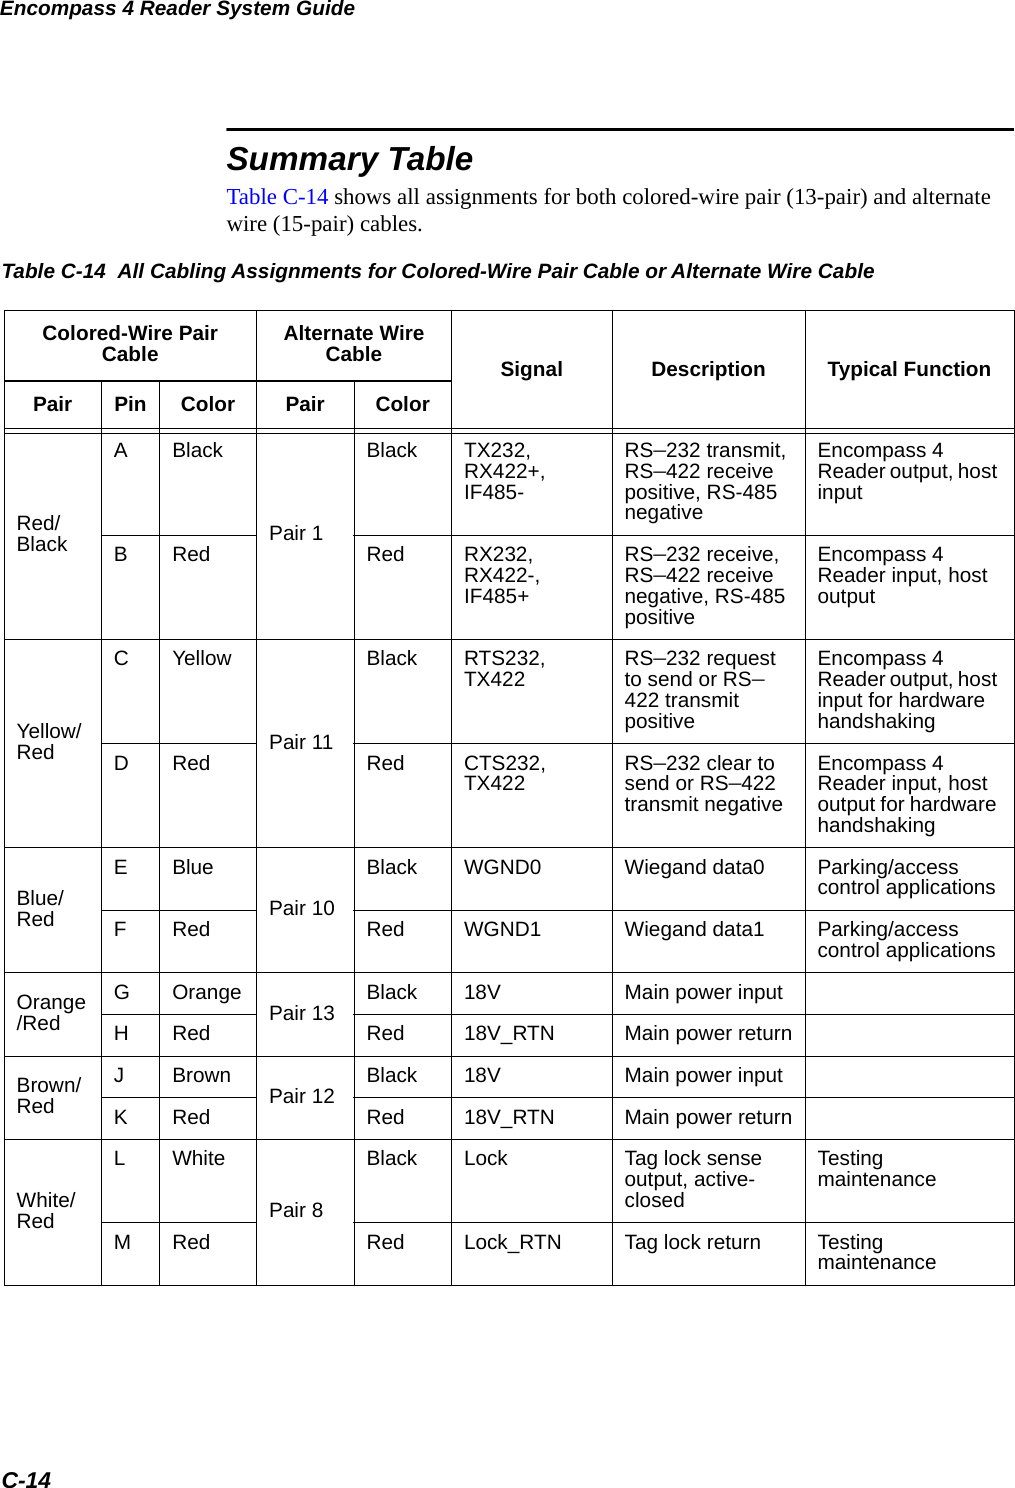 Encompass 4 Reader System GuideC-14Summary TableTable C-14 shows all assignments for both colored-wire pair (13-pair) and alternate wire (15-pair) cables.Table C-14  All Cabling Assignments for Colored-Wire Pair Cable or Alternate Wire Cable Colored-Wire Pair Cable Alternate Wire Cable Signal Description Typical FunctionPair Pin Color Pair ColorRed/BlackABlackPair 1Black TX232,RX422+, IF485-RS–232 transmit, RS–422 receive positive, RS-485 negativeEncompass 4 Reader output, host inputBRed Red RX232, RX422-, IF485+RS–232 receive, RS–422 receive negative, RS-485 positiveEncompass 4 Reader input, host outputYellow/RedCYellowPair 11Black RTS232, TX422 RS–232 request to send or RS–422 transmit positiveEncompass 4 Reader output, host input for hardware handshakingDRed Red CTS232, TX422 RS–232 clear to send or RS–422 transmit negativeEncompass 4 Reader input, host output for hardware handshakingBlue/RedEBluePair 10Black WGND0 Wiegand data0 Parking/access control applicationsFRed Red WGND1 Wiegand data1 Parking/access control applicationsOrange/RedGOrange Pair 13 Black 18V Main power inputHRed Red 18V_RTN Main power returnBrown/RedJBrown Pair 12 Black 18V Main power inputKRed Red 18V_RTN Main power returnWhite/RedLWhitePair 8Black Lock Tag lock sense output, active-closedTesting maintenanceMRed Red Lock_RTN Tag lock return Testing maintenance